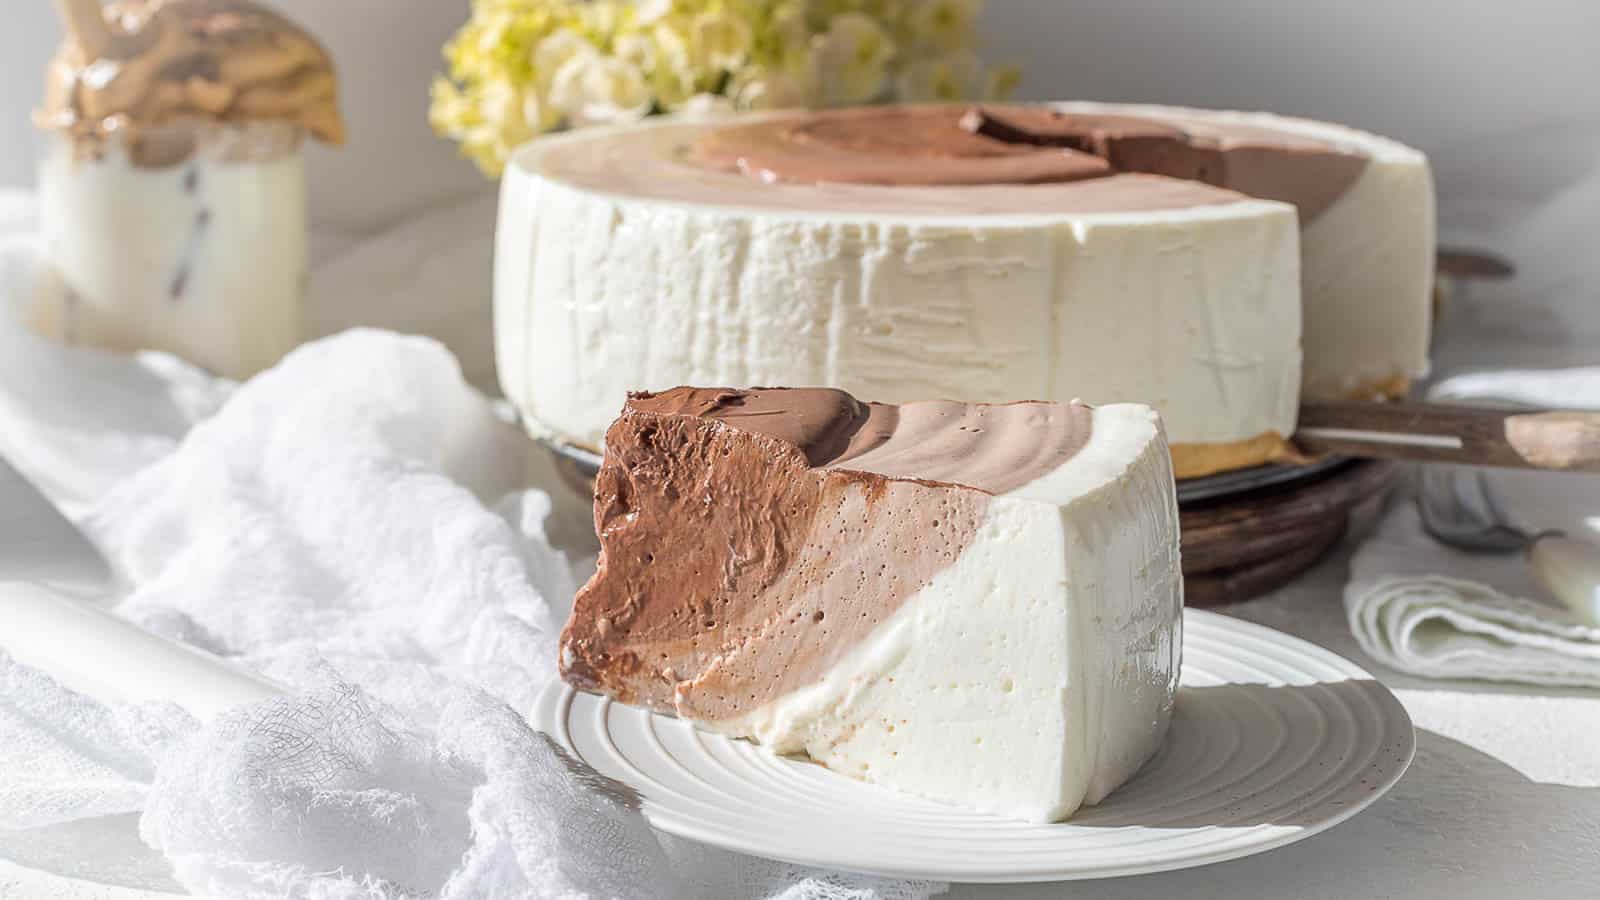 <p>This fail-proof no bake no crust Yogurt Chocolate Ripple Cheesecake is super quick and easy to make especially during summer when no oven is wanted. This sugar-free and low carb cheesecake recipe feel as if you have just gotten 3 different keto desserts in one go. Fully gluten-free, grain-free, and without needing any eggs at all.<br><strong>Get the Recipe: </strong><a href="https://www.lowcarb-nocarb.com/no-bake-chocolate-ripple-keto-cheesecake/?utm_source=msn&utm_medium=page&utm_campaign=msn">Yogurt Chocolate Ripple Cheesecake</a></p>